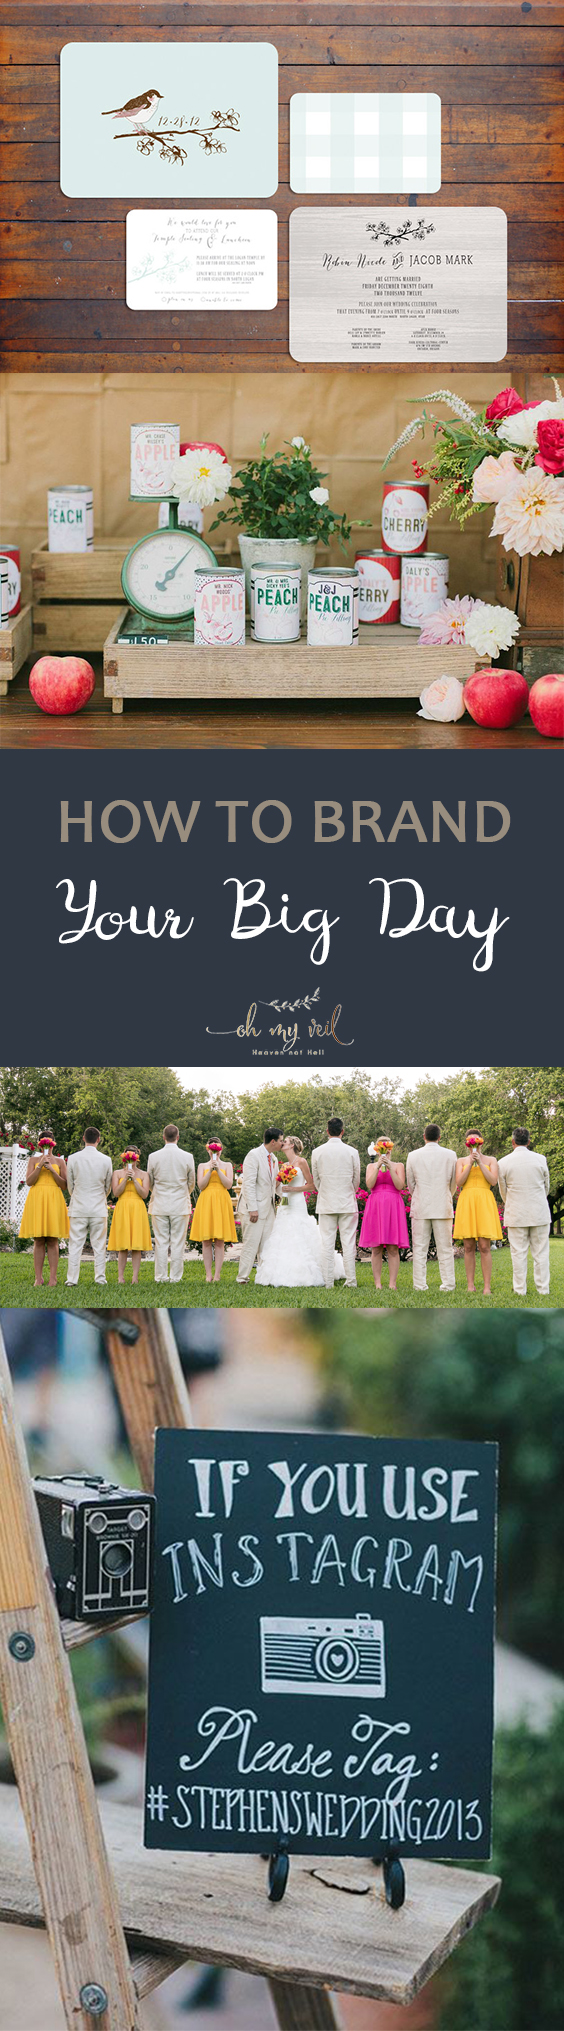 How to Brand Your Big Day | How to Brand Your Wedding, Personalize Your Wedding, Wedding DIY, DIY Wedding Projects, Inexpensive Wedding Projects